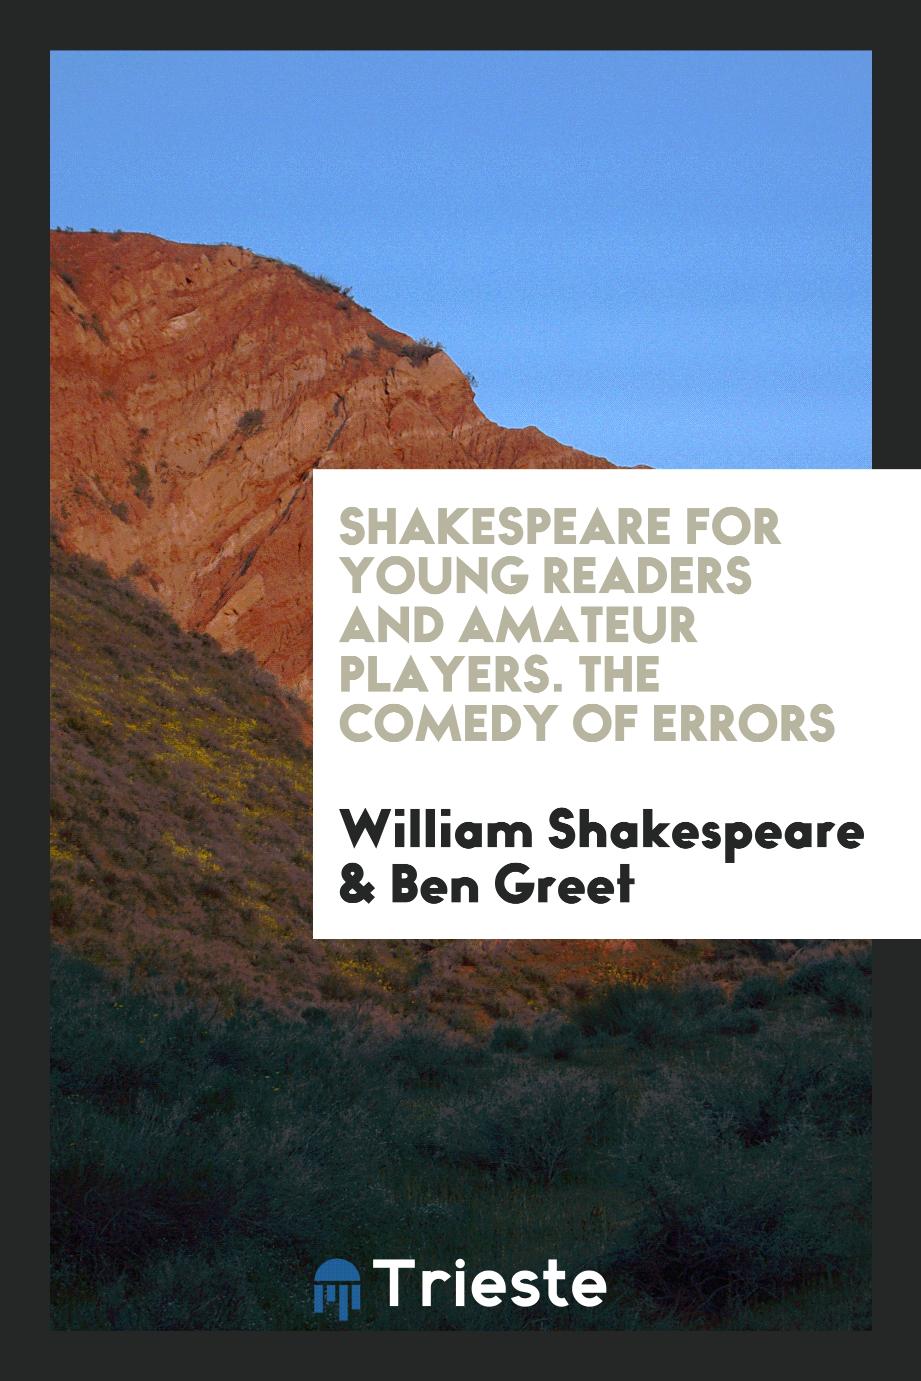 Shakespeare for young readers and amateur players. The comedy of errors